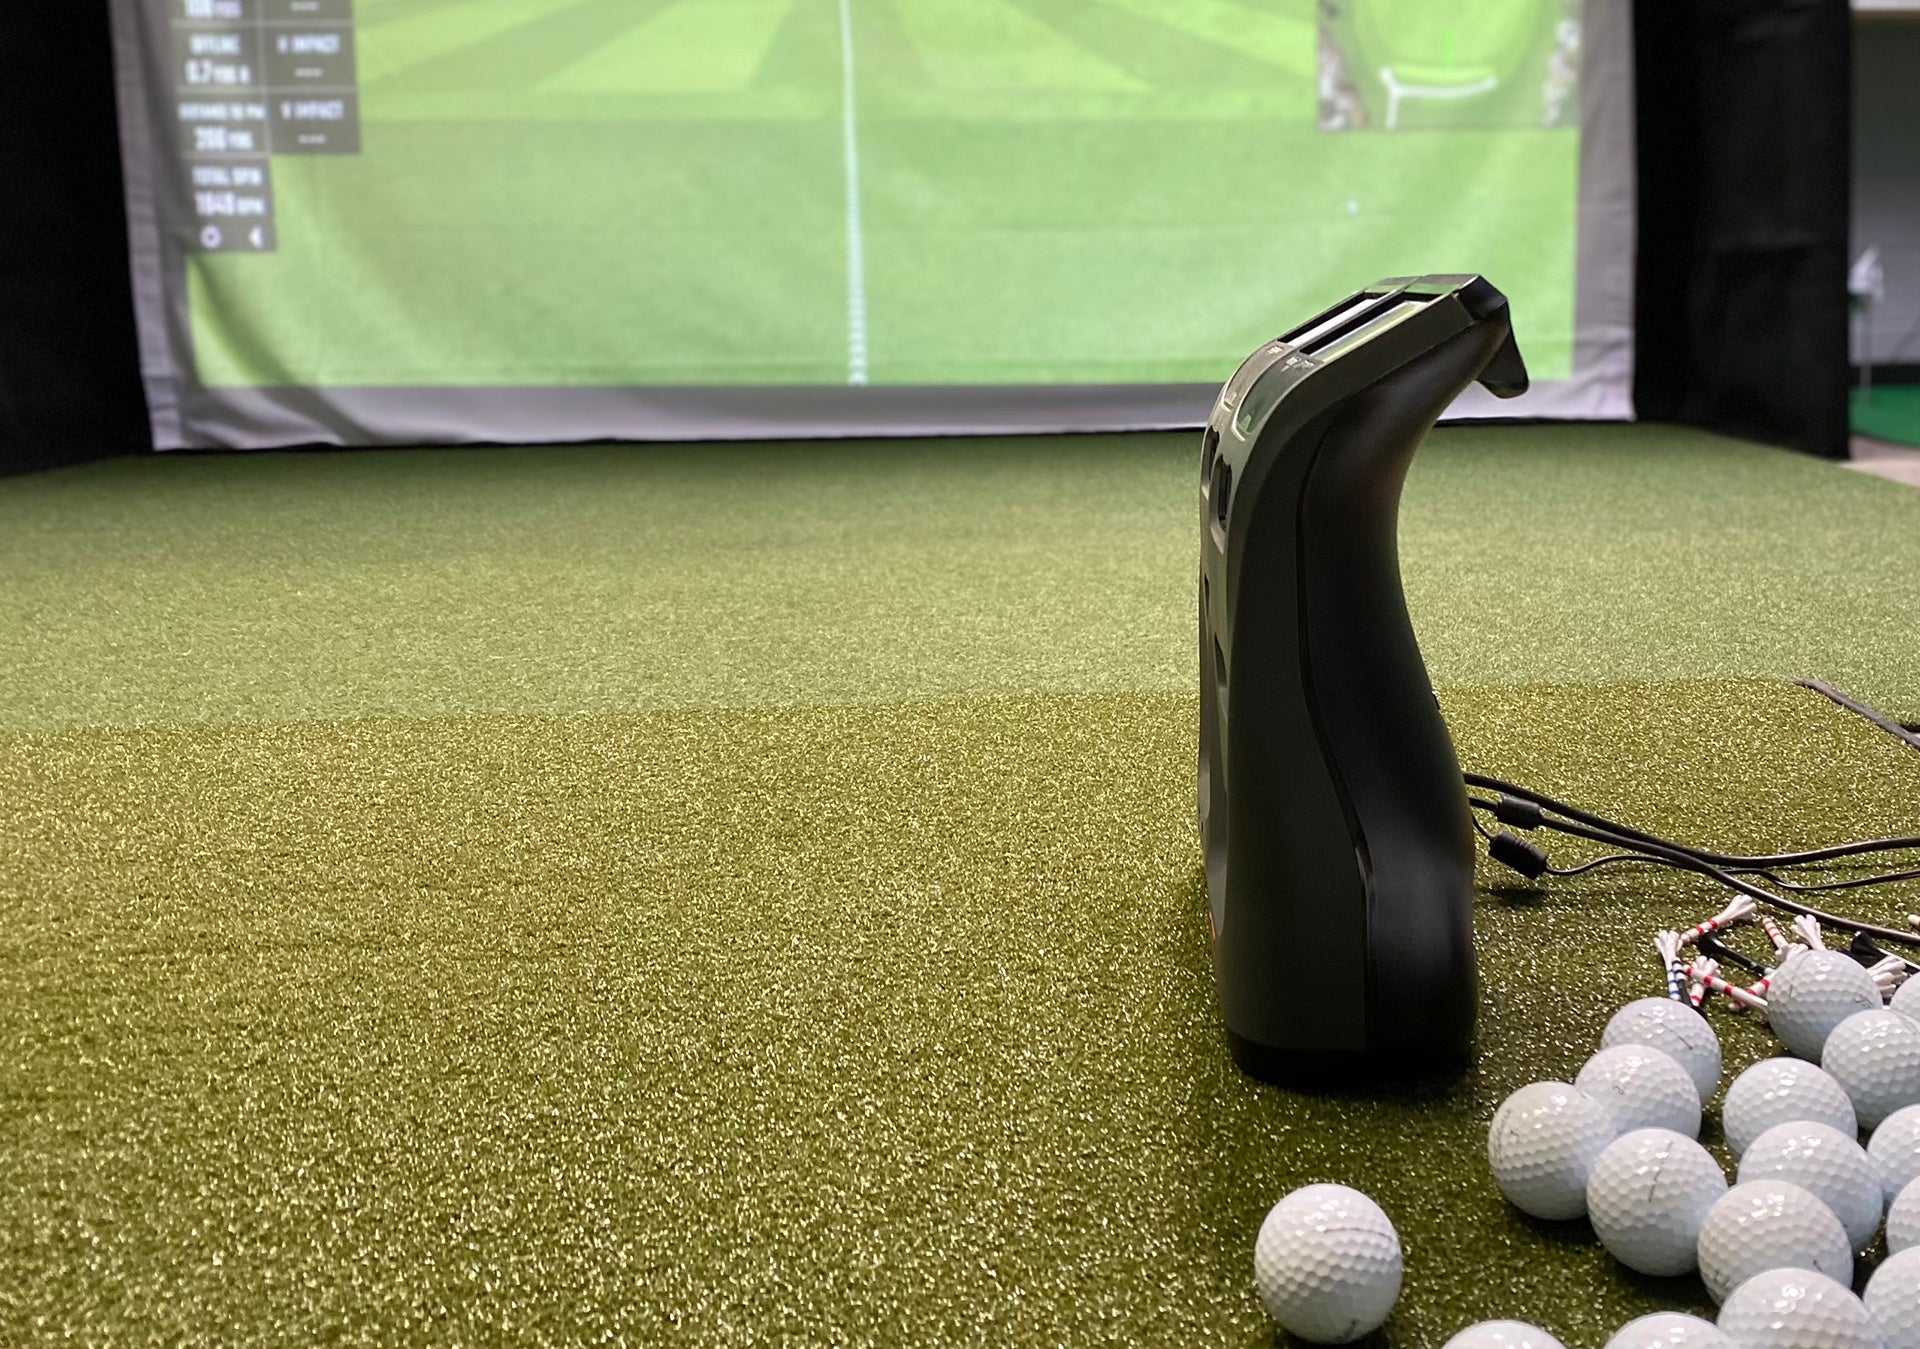 The Bushnell Launch Pro next to the Foresight GC3 in a golf simulator next to golf balls